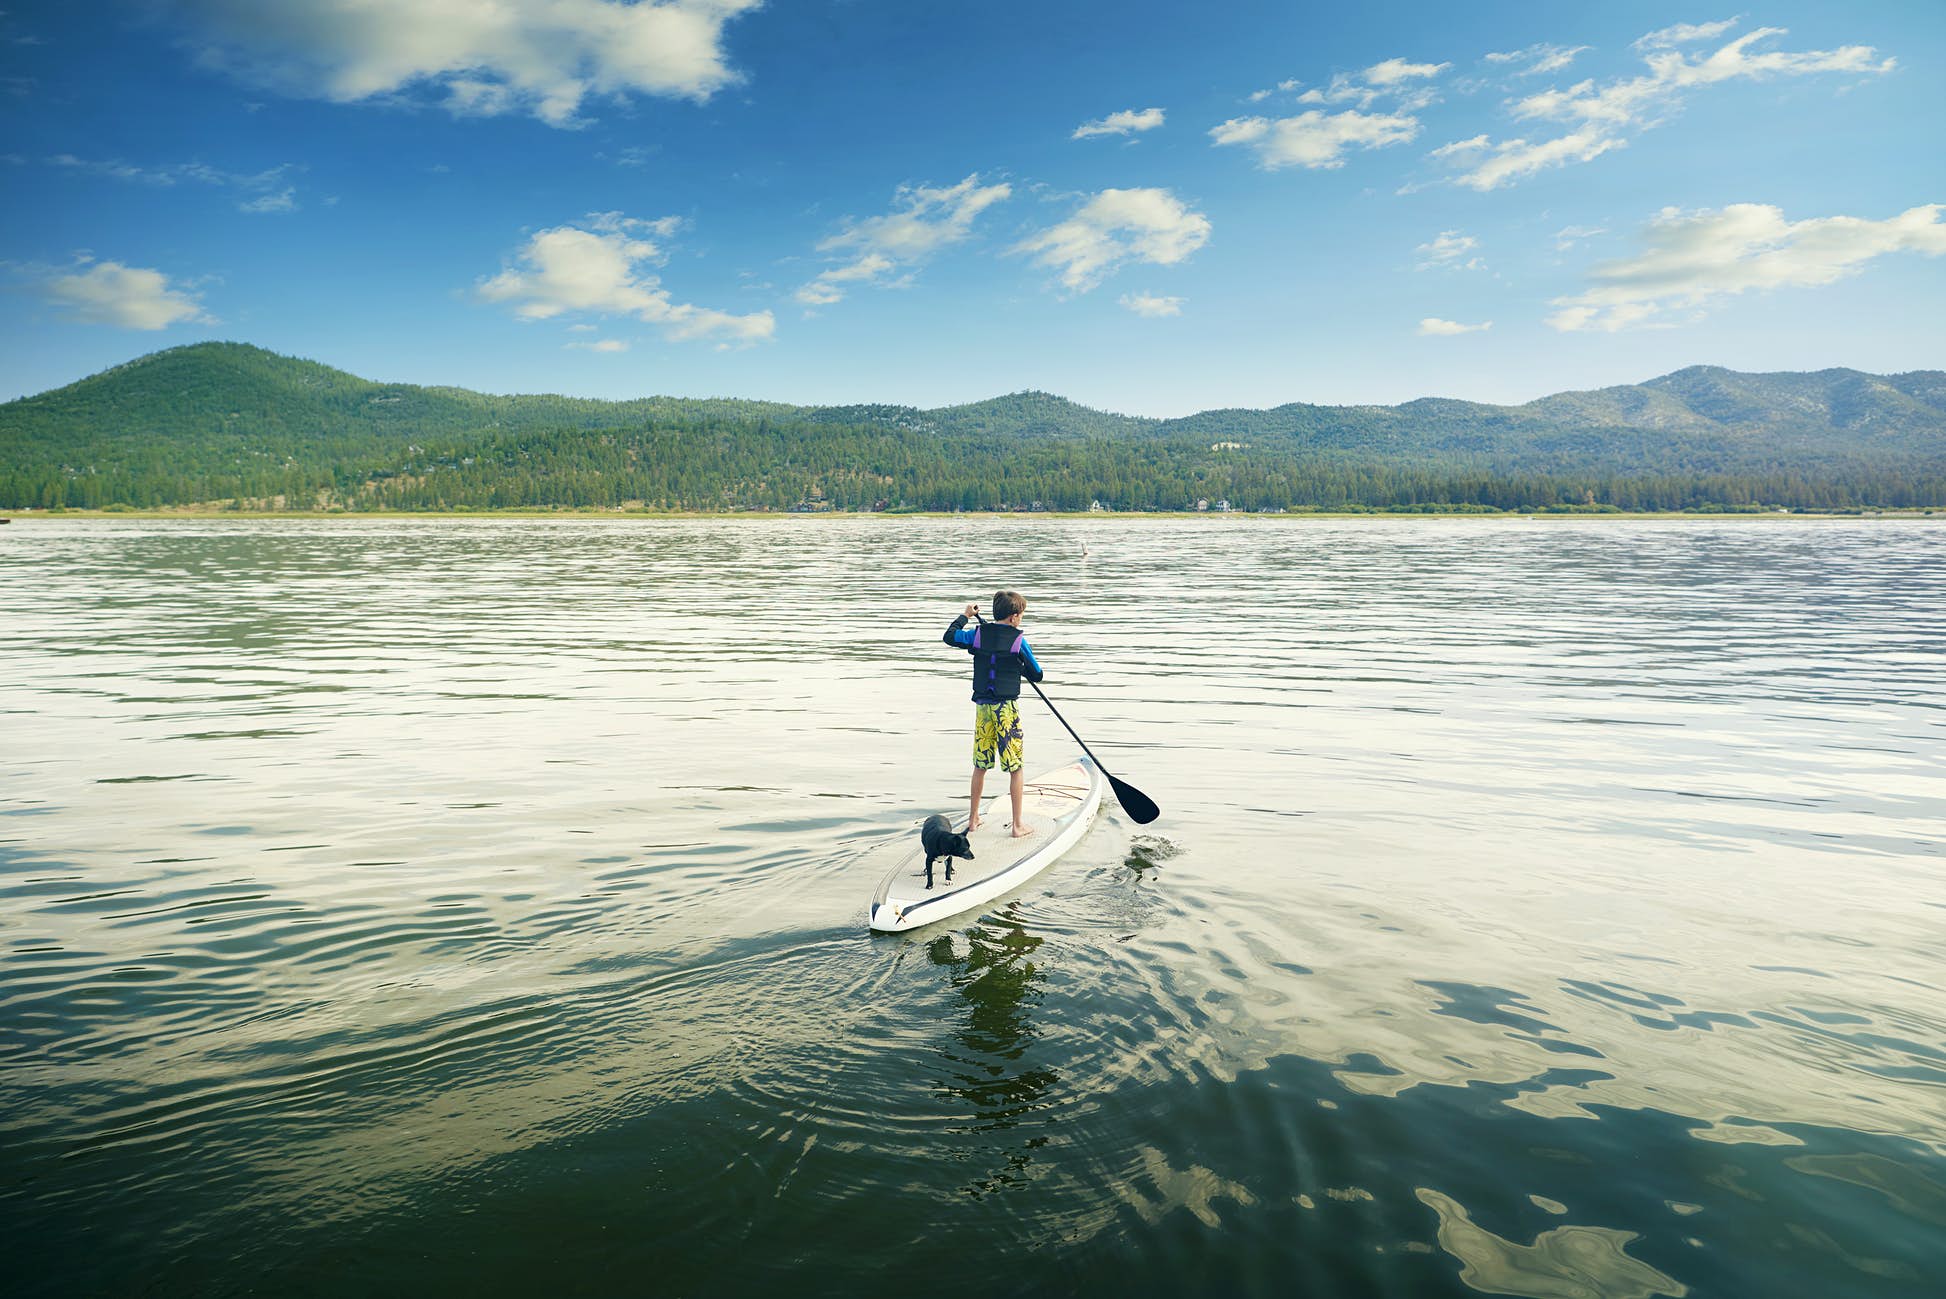 Big Bear Lake in California was the top trending destination © The Image Bank / Getty Images